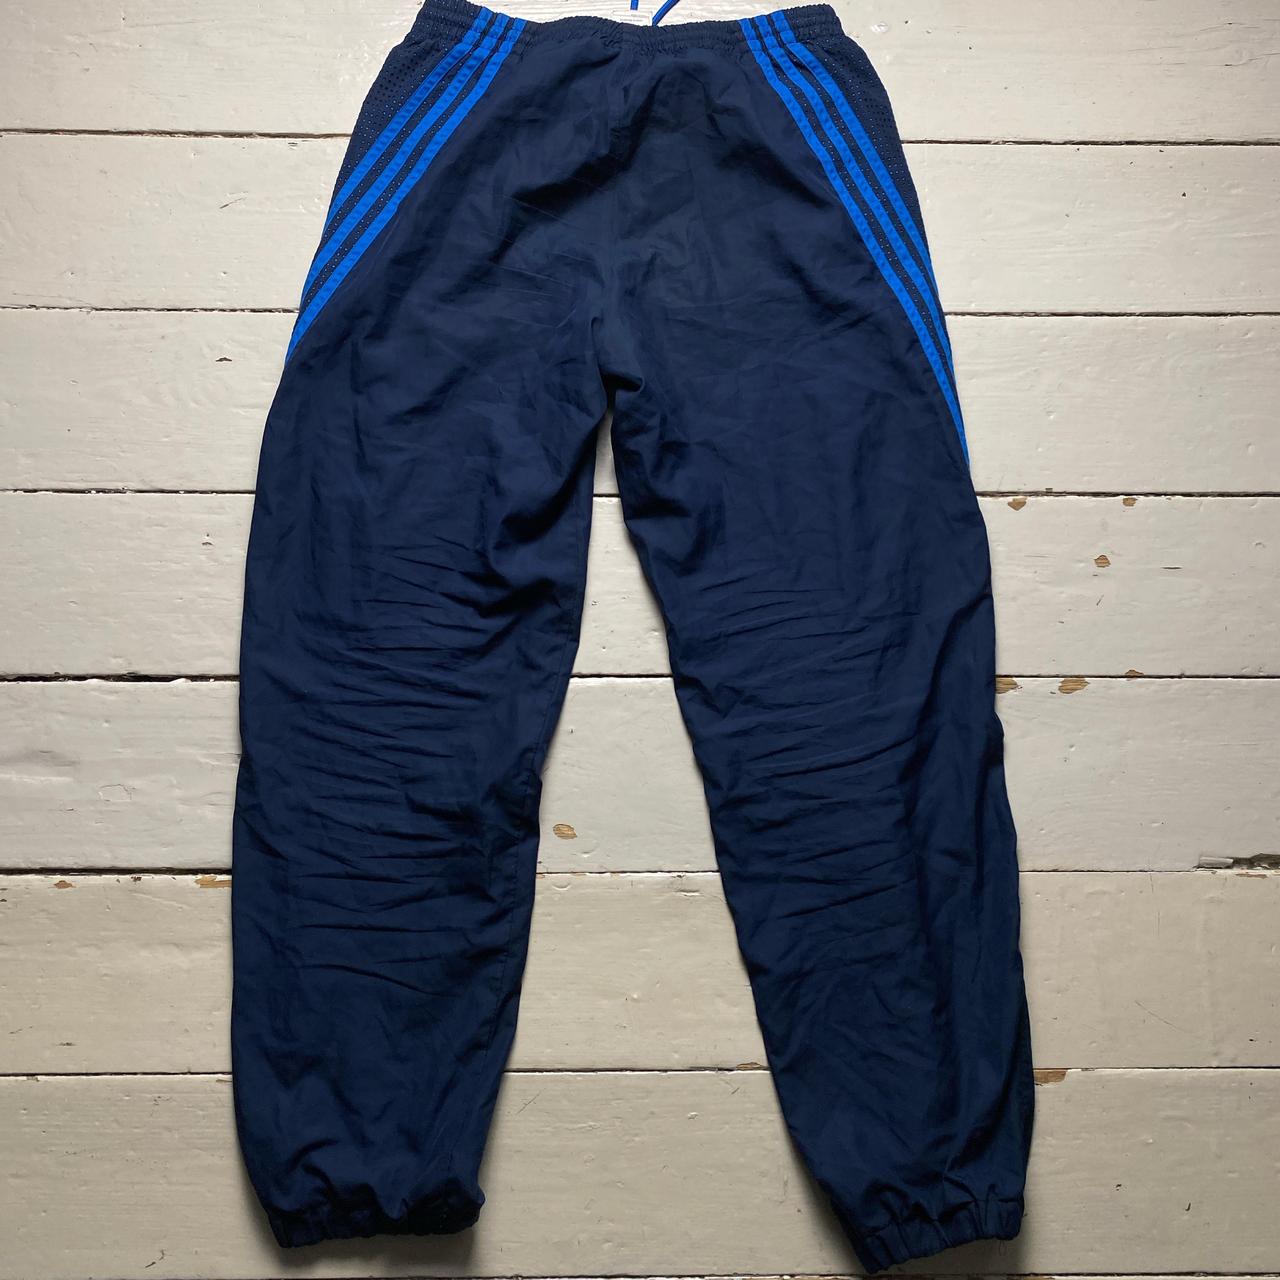 Adidas Navy and Blue Stripe Shell Trackpant Baggy Bottoms